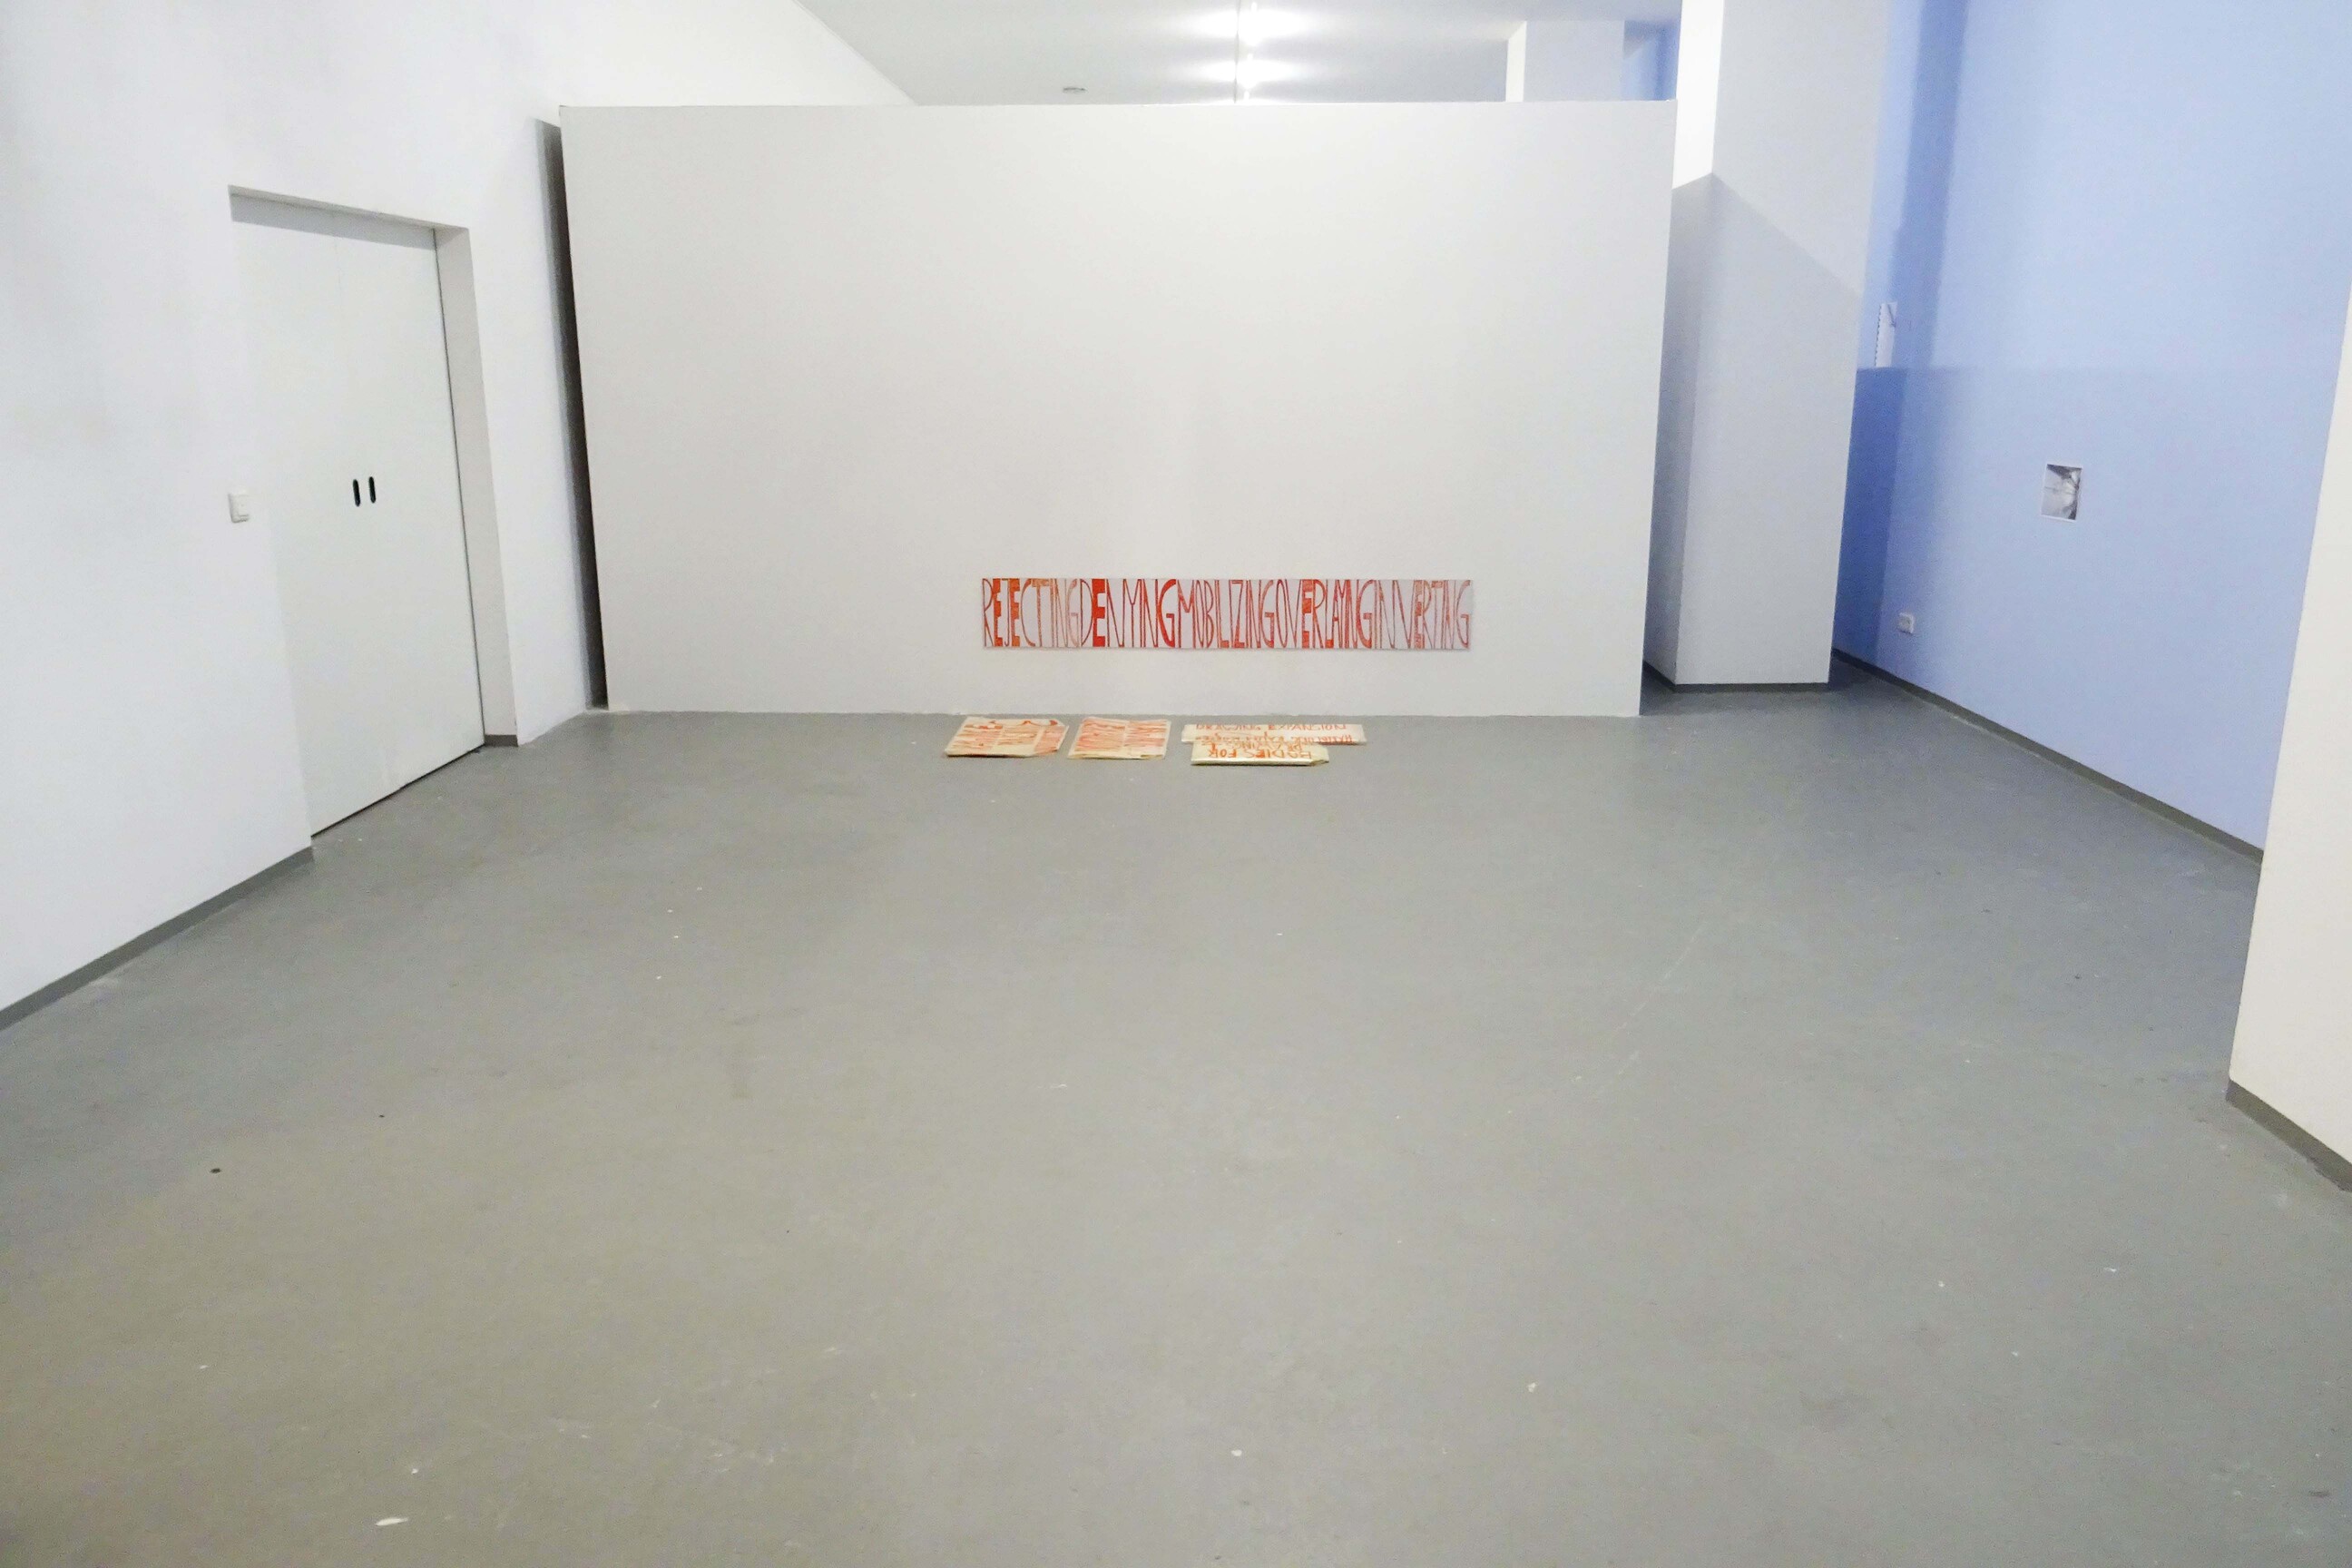 BOX, exhibition view - SPACE vs. SPACE